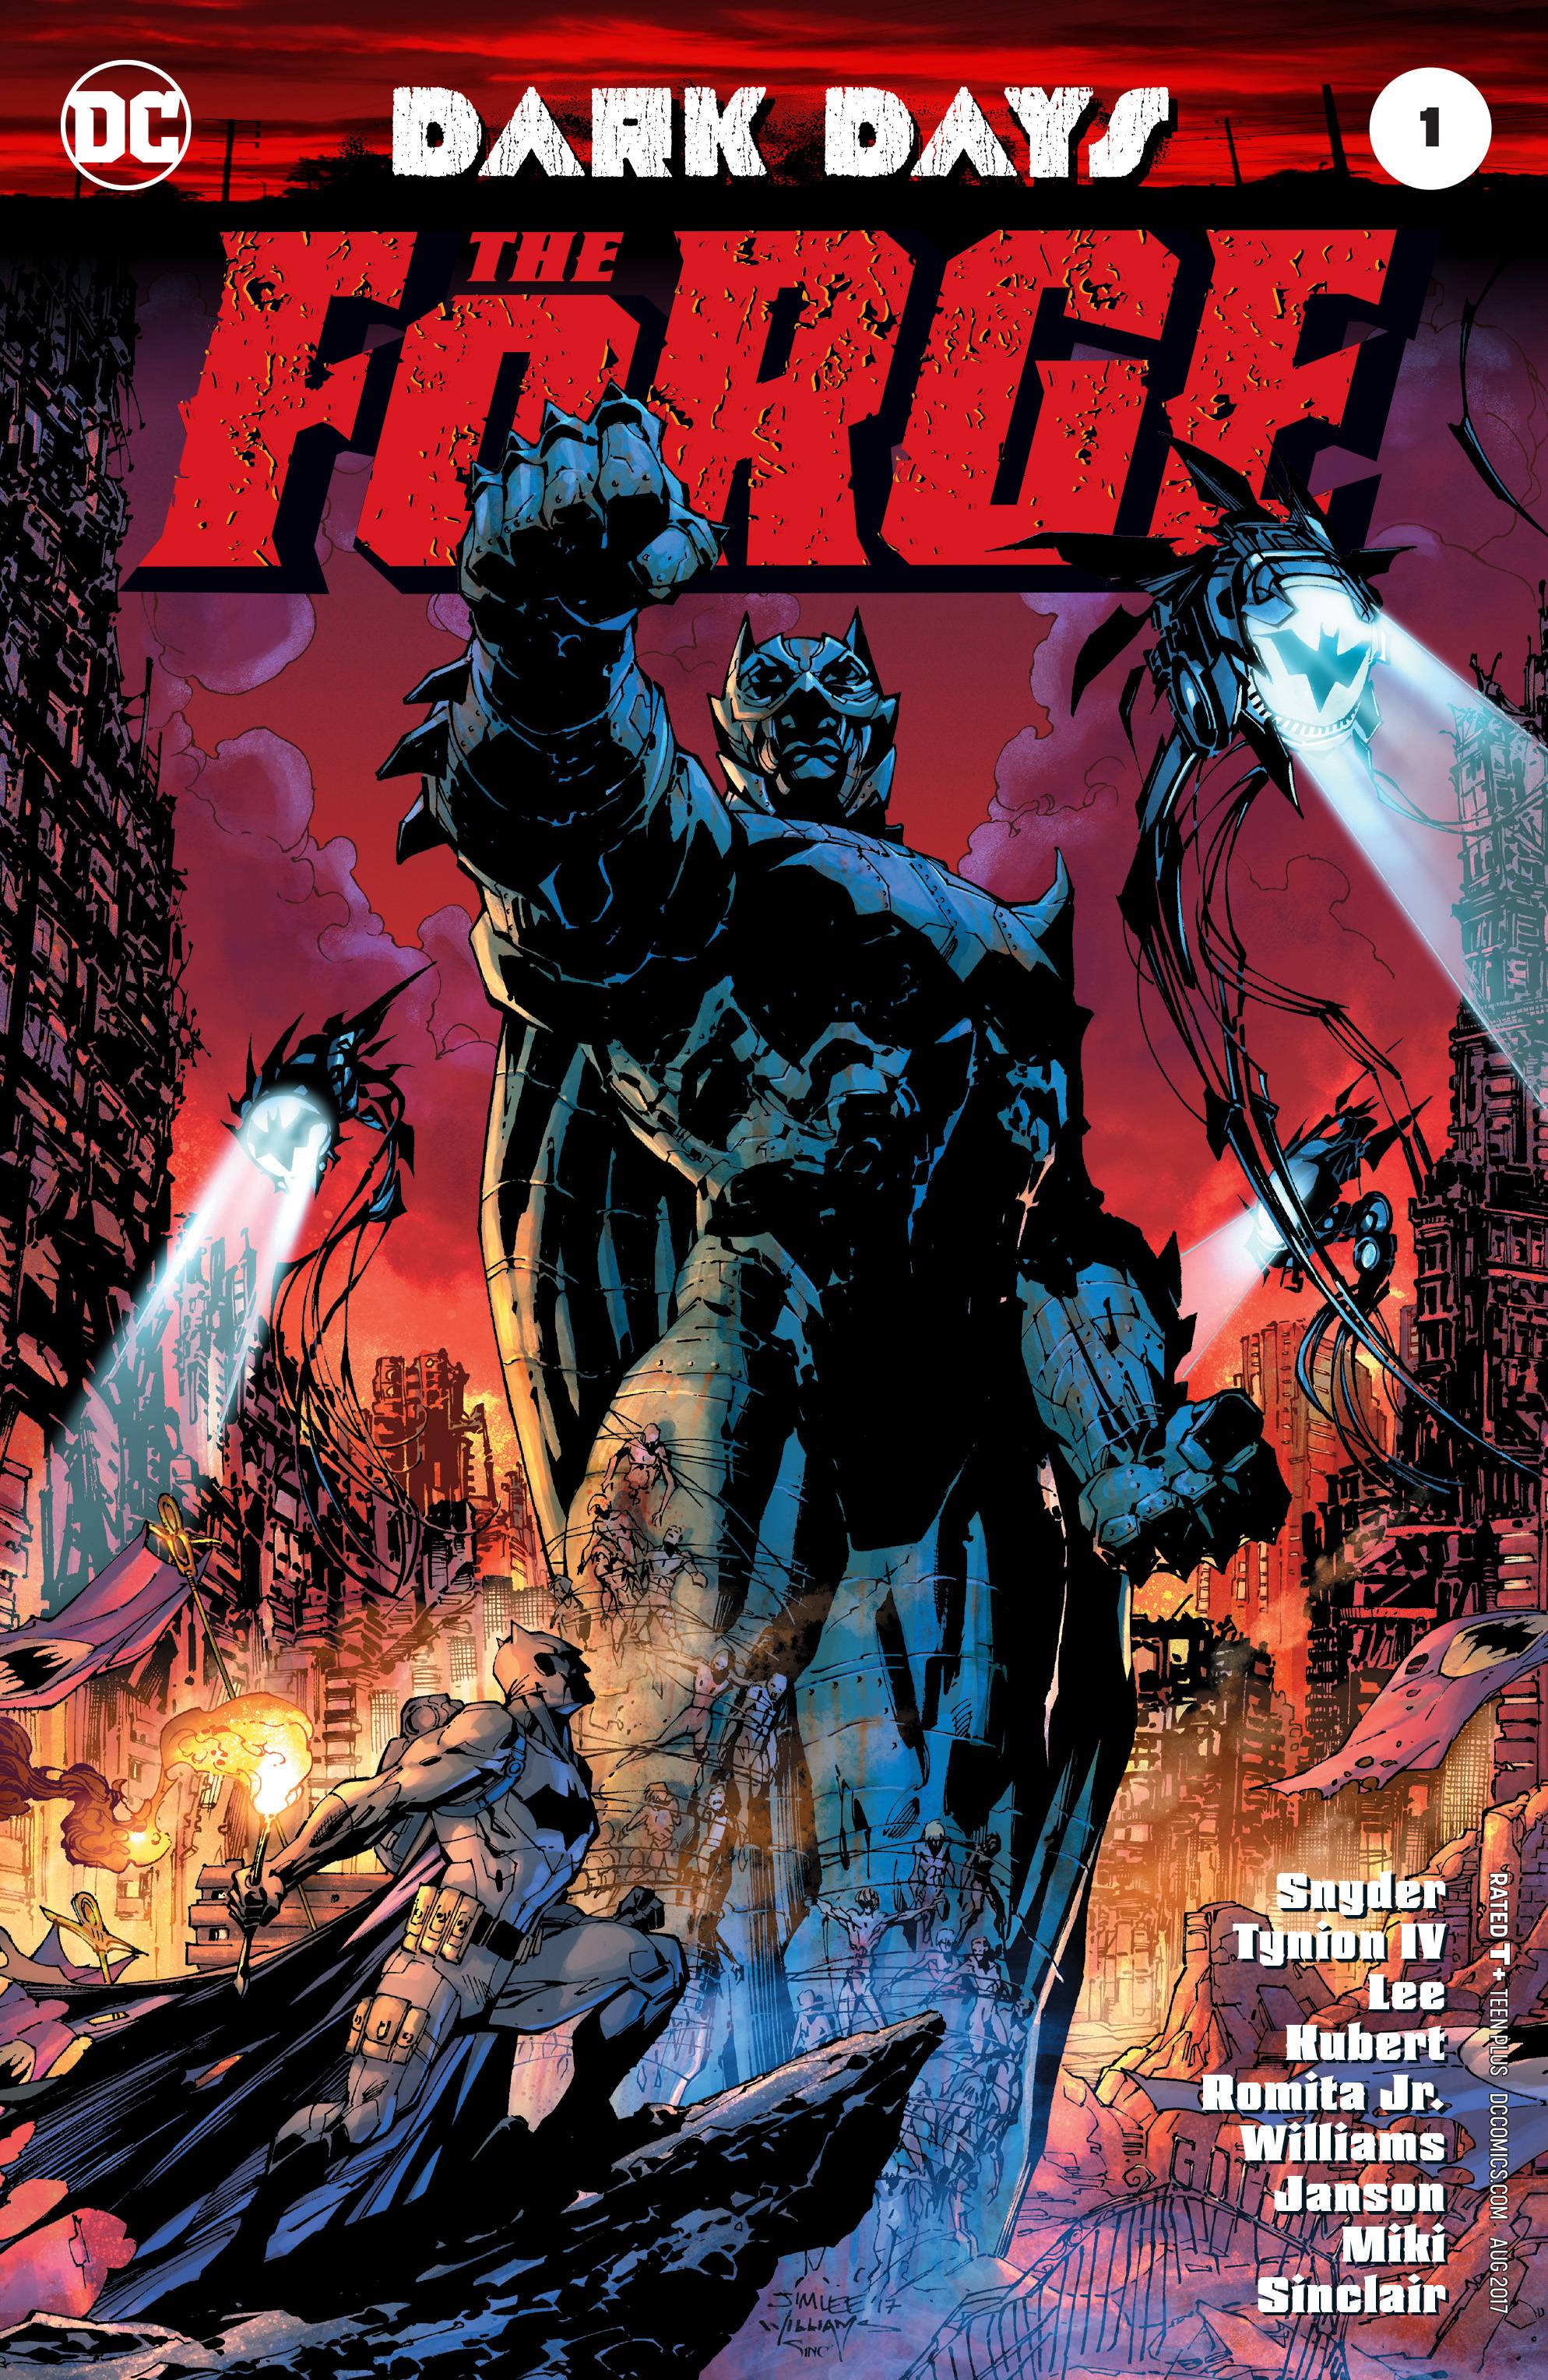 Cover to DARK DAYS: THE FORGE #1 by Jim Lee and Scott Williams